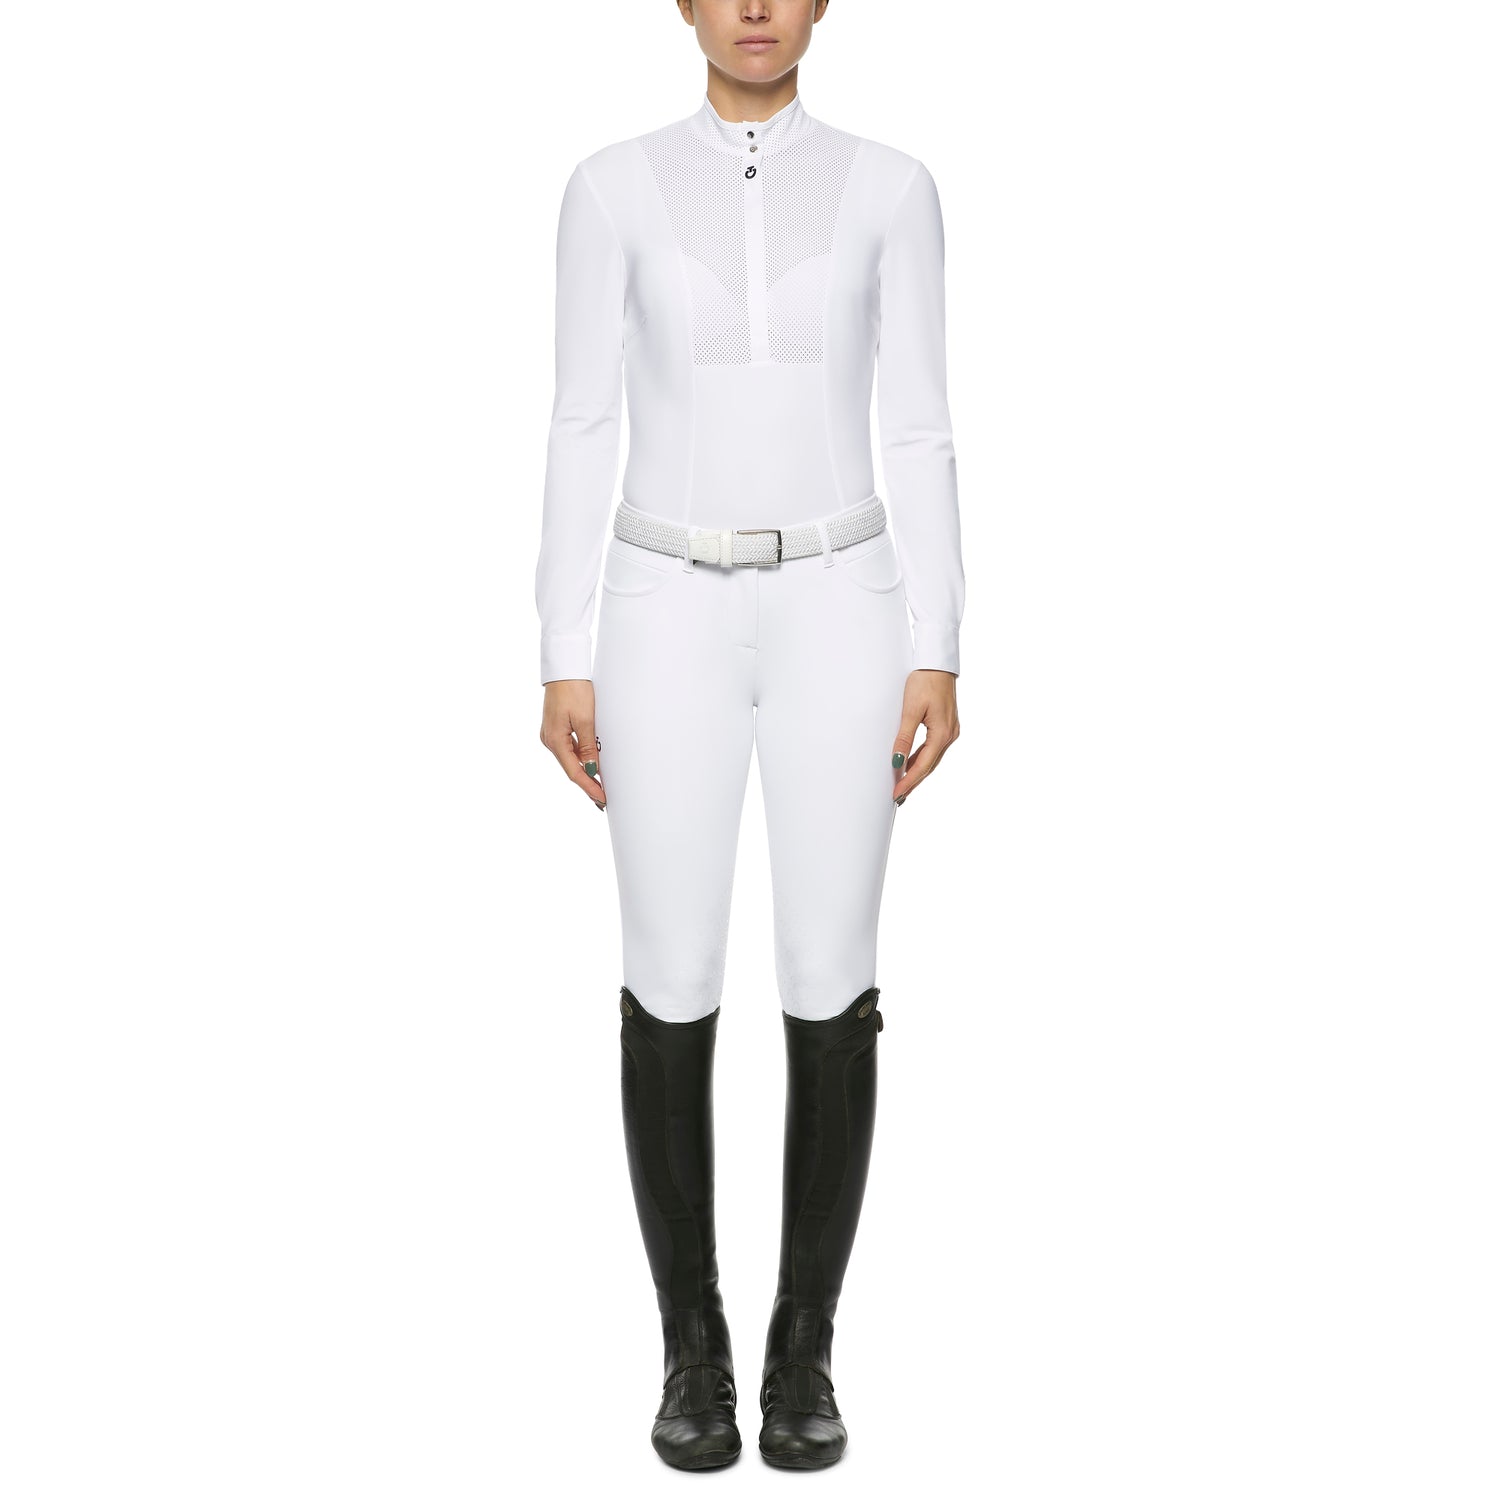 Cavalleria Toscana Perforated Bib And Collar L/S Jersey Competition ShirtStart the spring season with this stunning perforated Cavalleria Toscana show shirt. Perforated bib and collar with a delicate CT logo centre front give this shirt a modern elegance.  Also available in pale blue and white. 